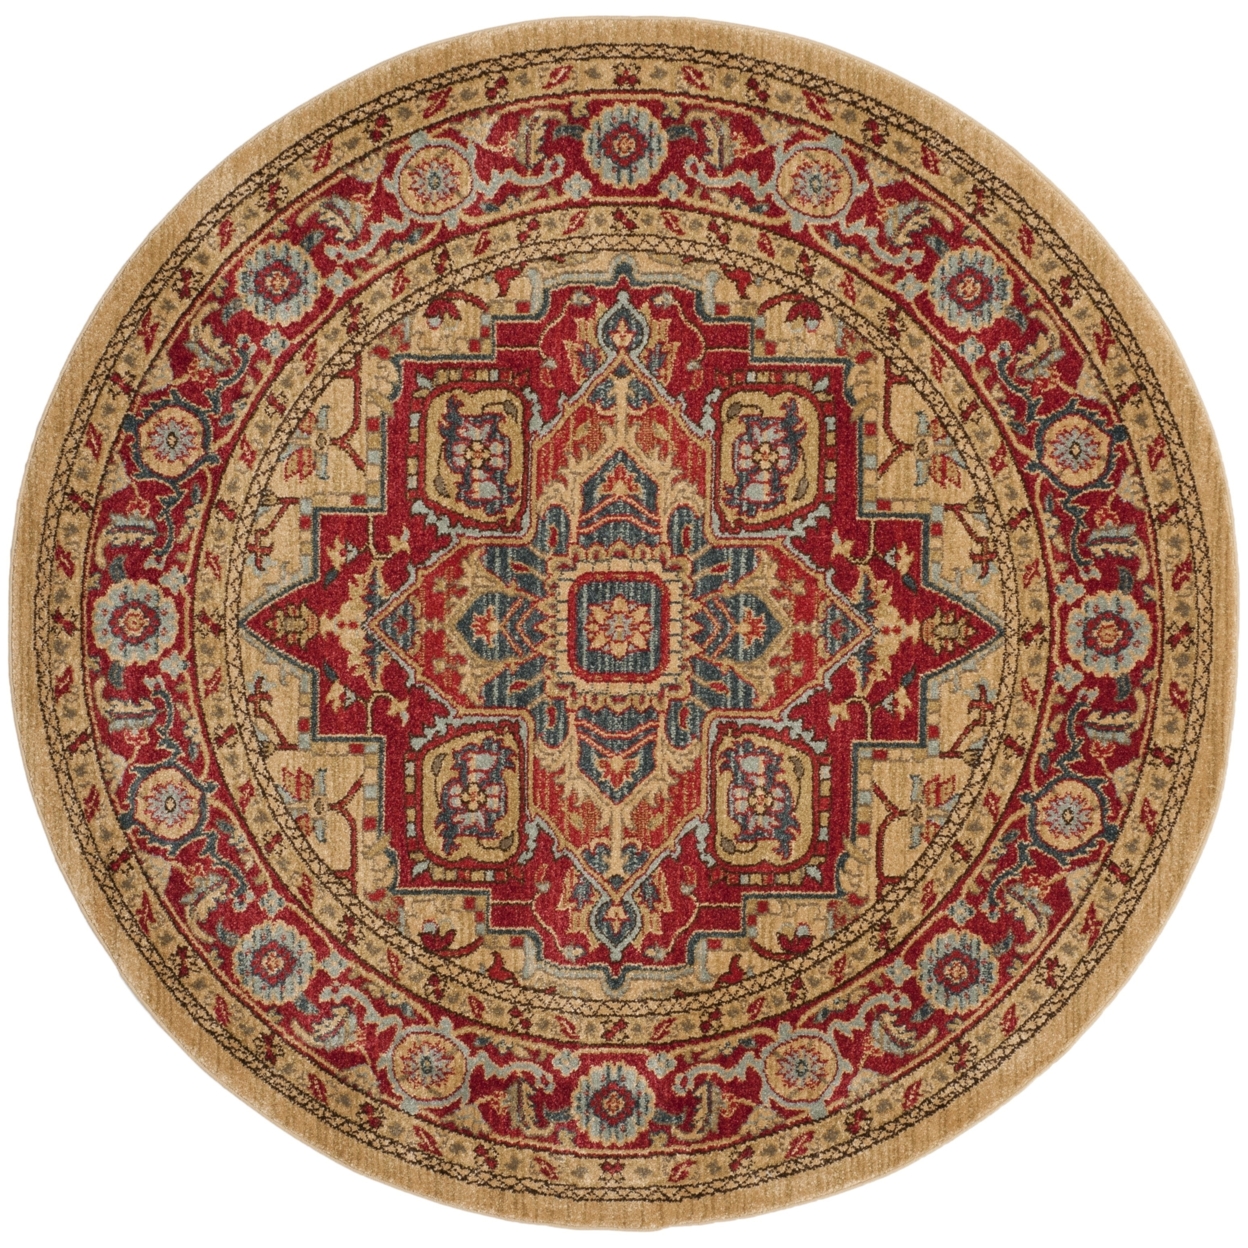 SAFAVIEH Mahal Collection MAH698A Red / Natural Rug - 3' Round